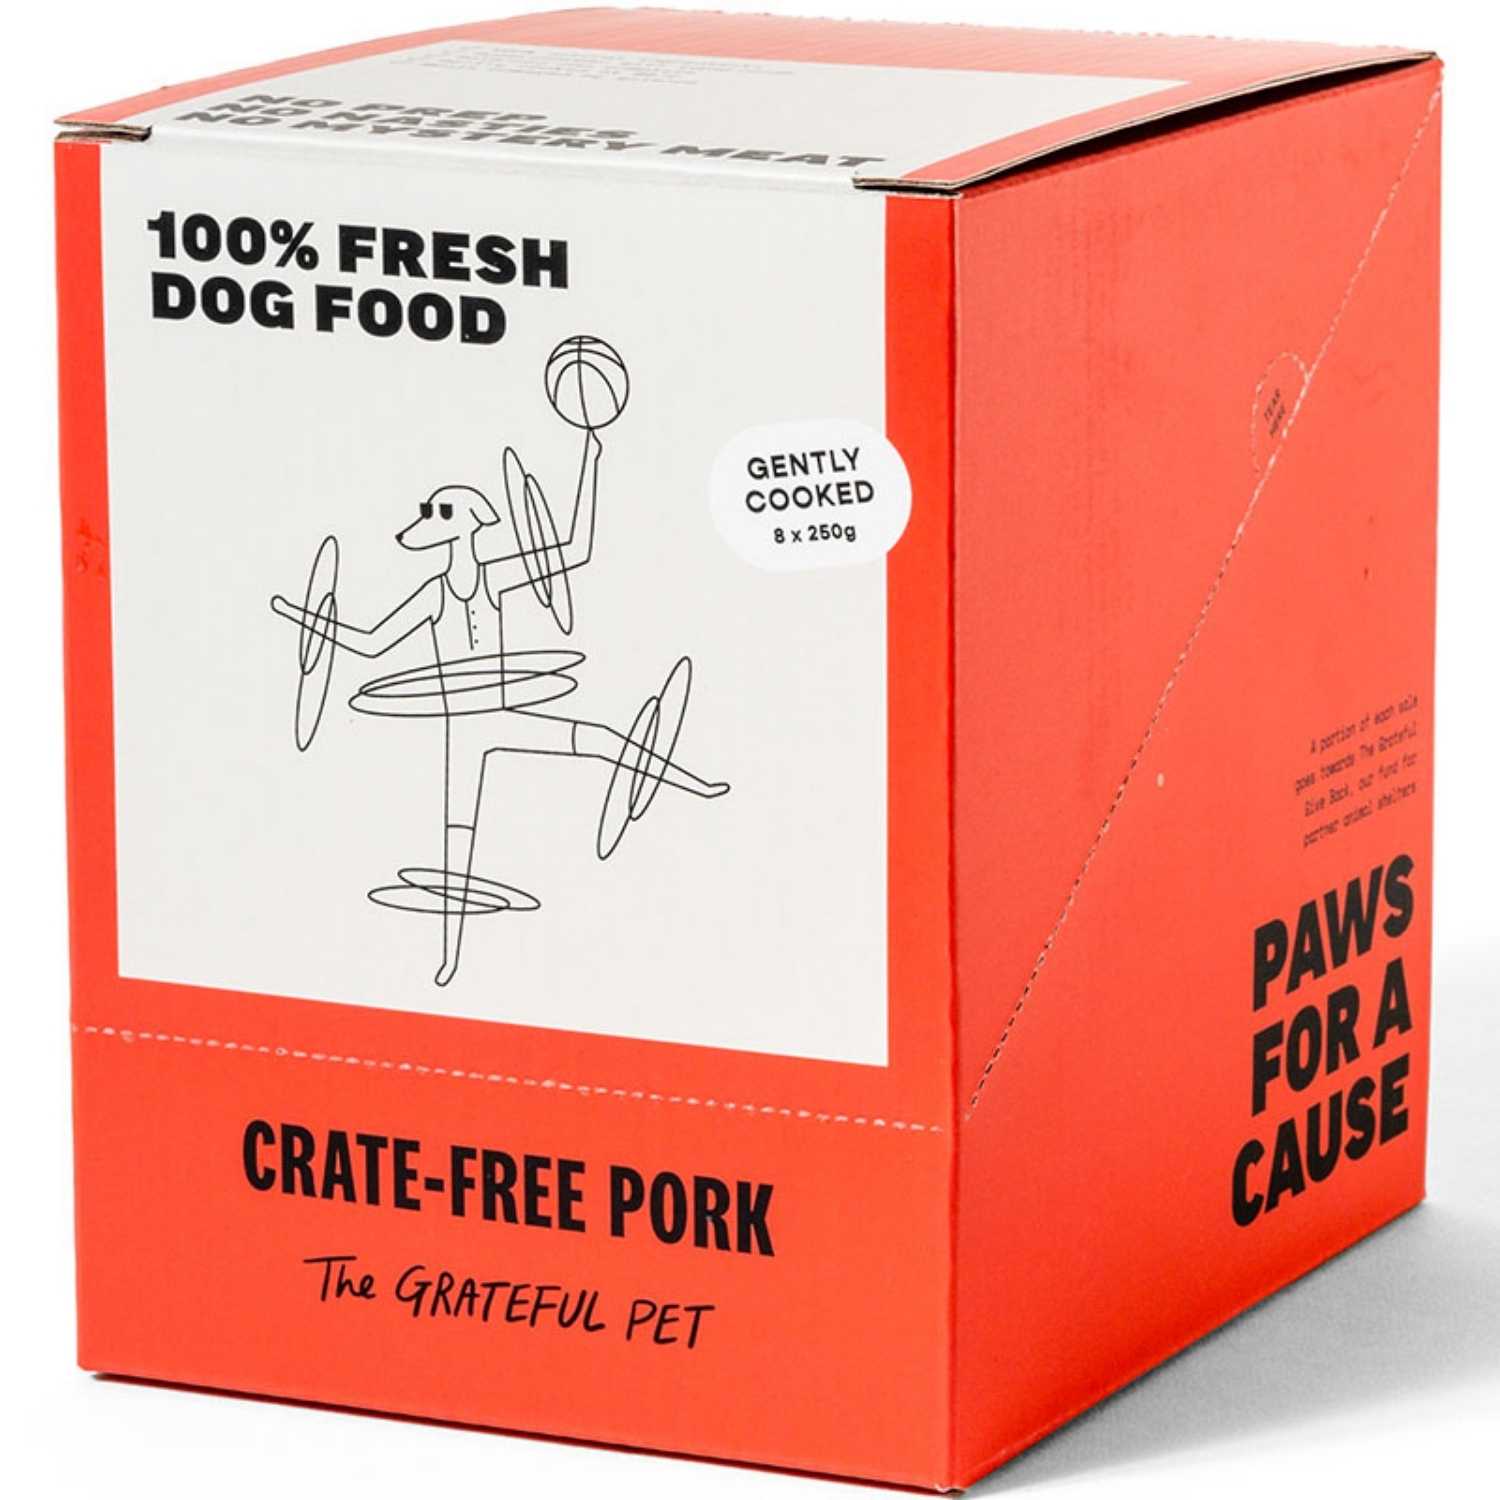 The Grateful Pet - Gently Cooked (Crate-Free Pork) - Dog (8 x 250g Pouch) Food (Case)